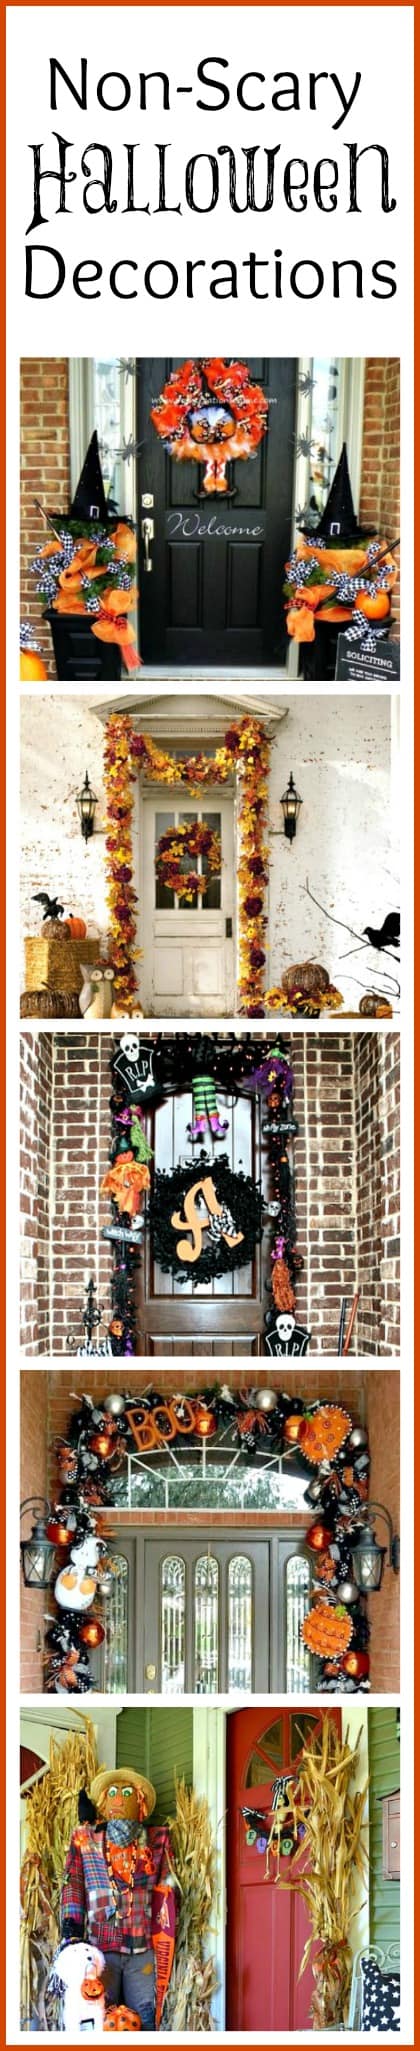 Non-Scary Outdoor Halloween Decorations For Your Front Door poster.